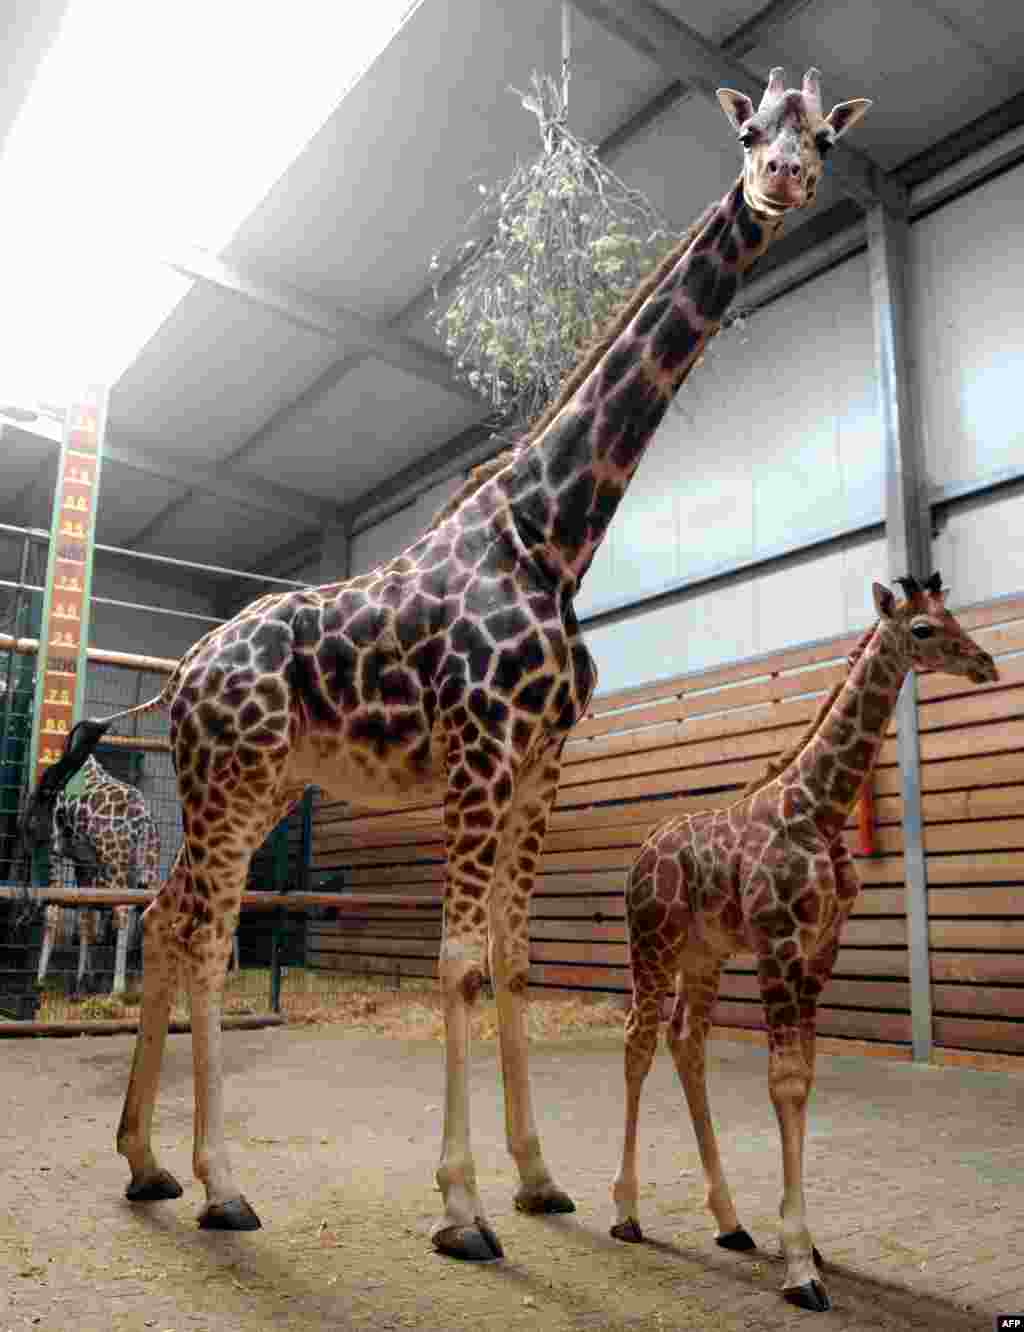 Young giraffe named 'Jamiro' stands next to its mother 'Arusha' in their enclosure at the animal park in Jaderberg, northern Germany.